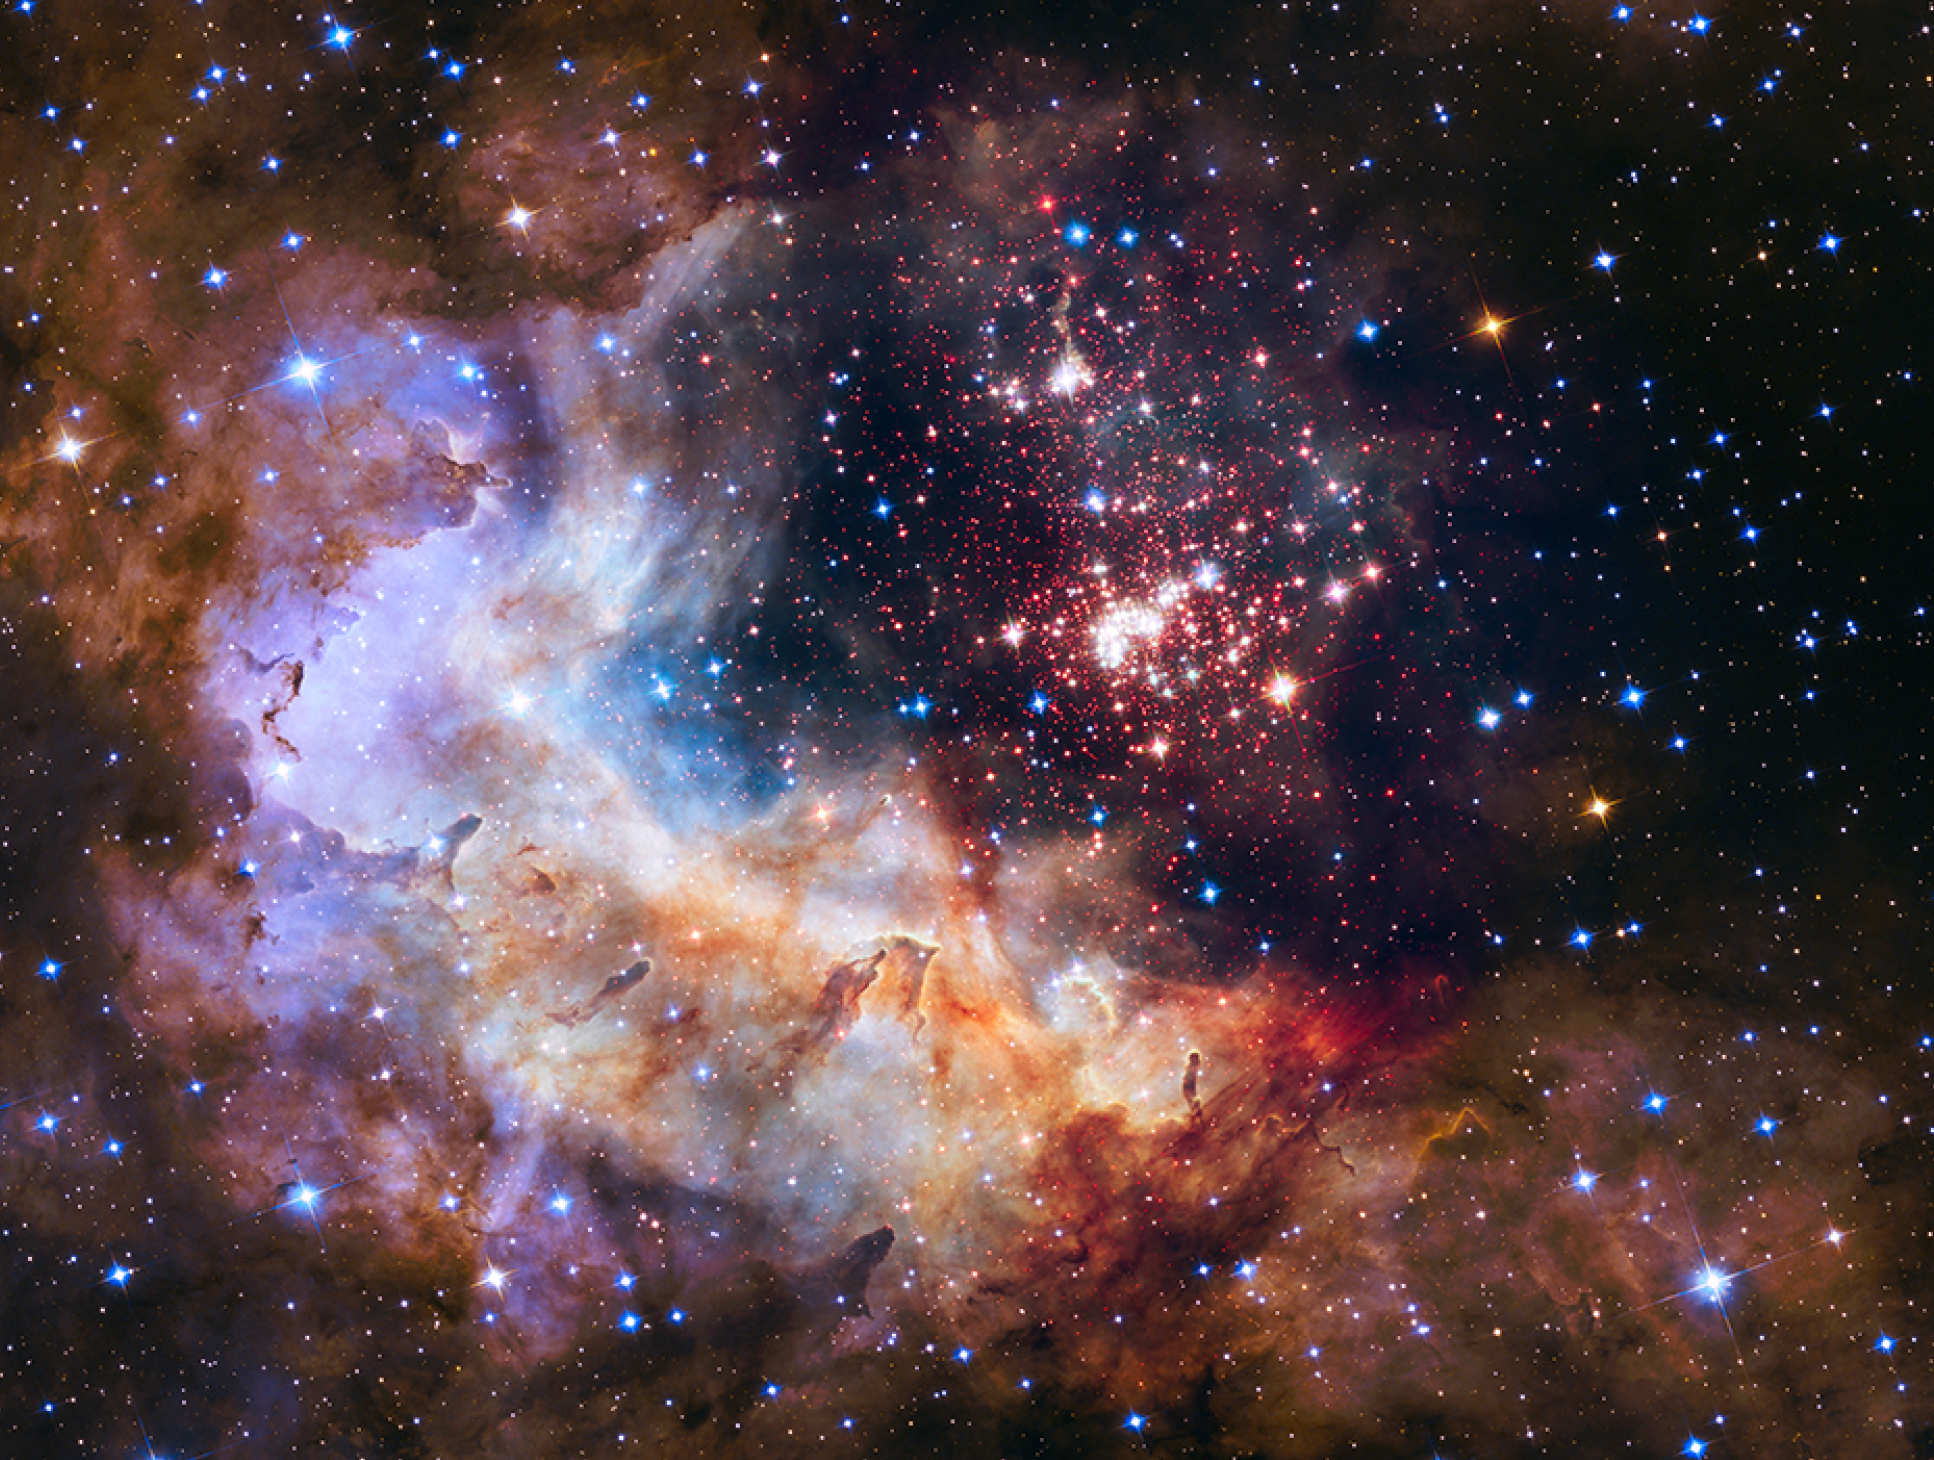 An image captured by the Hubble of Westerlund 2 - a giant a giant cluster of about 3,000 stars located 20,000 light-years away in the constellation Carina.